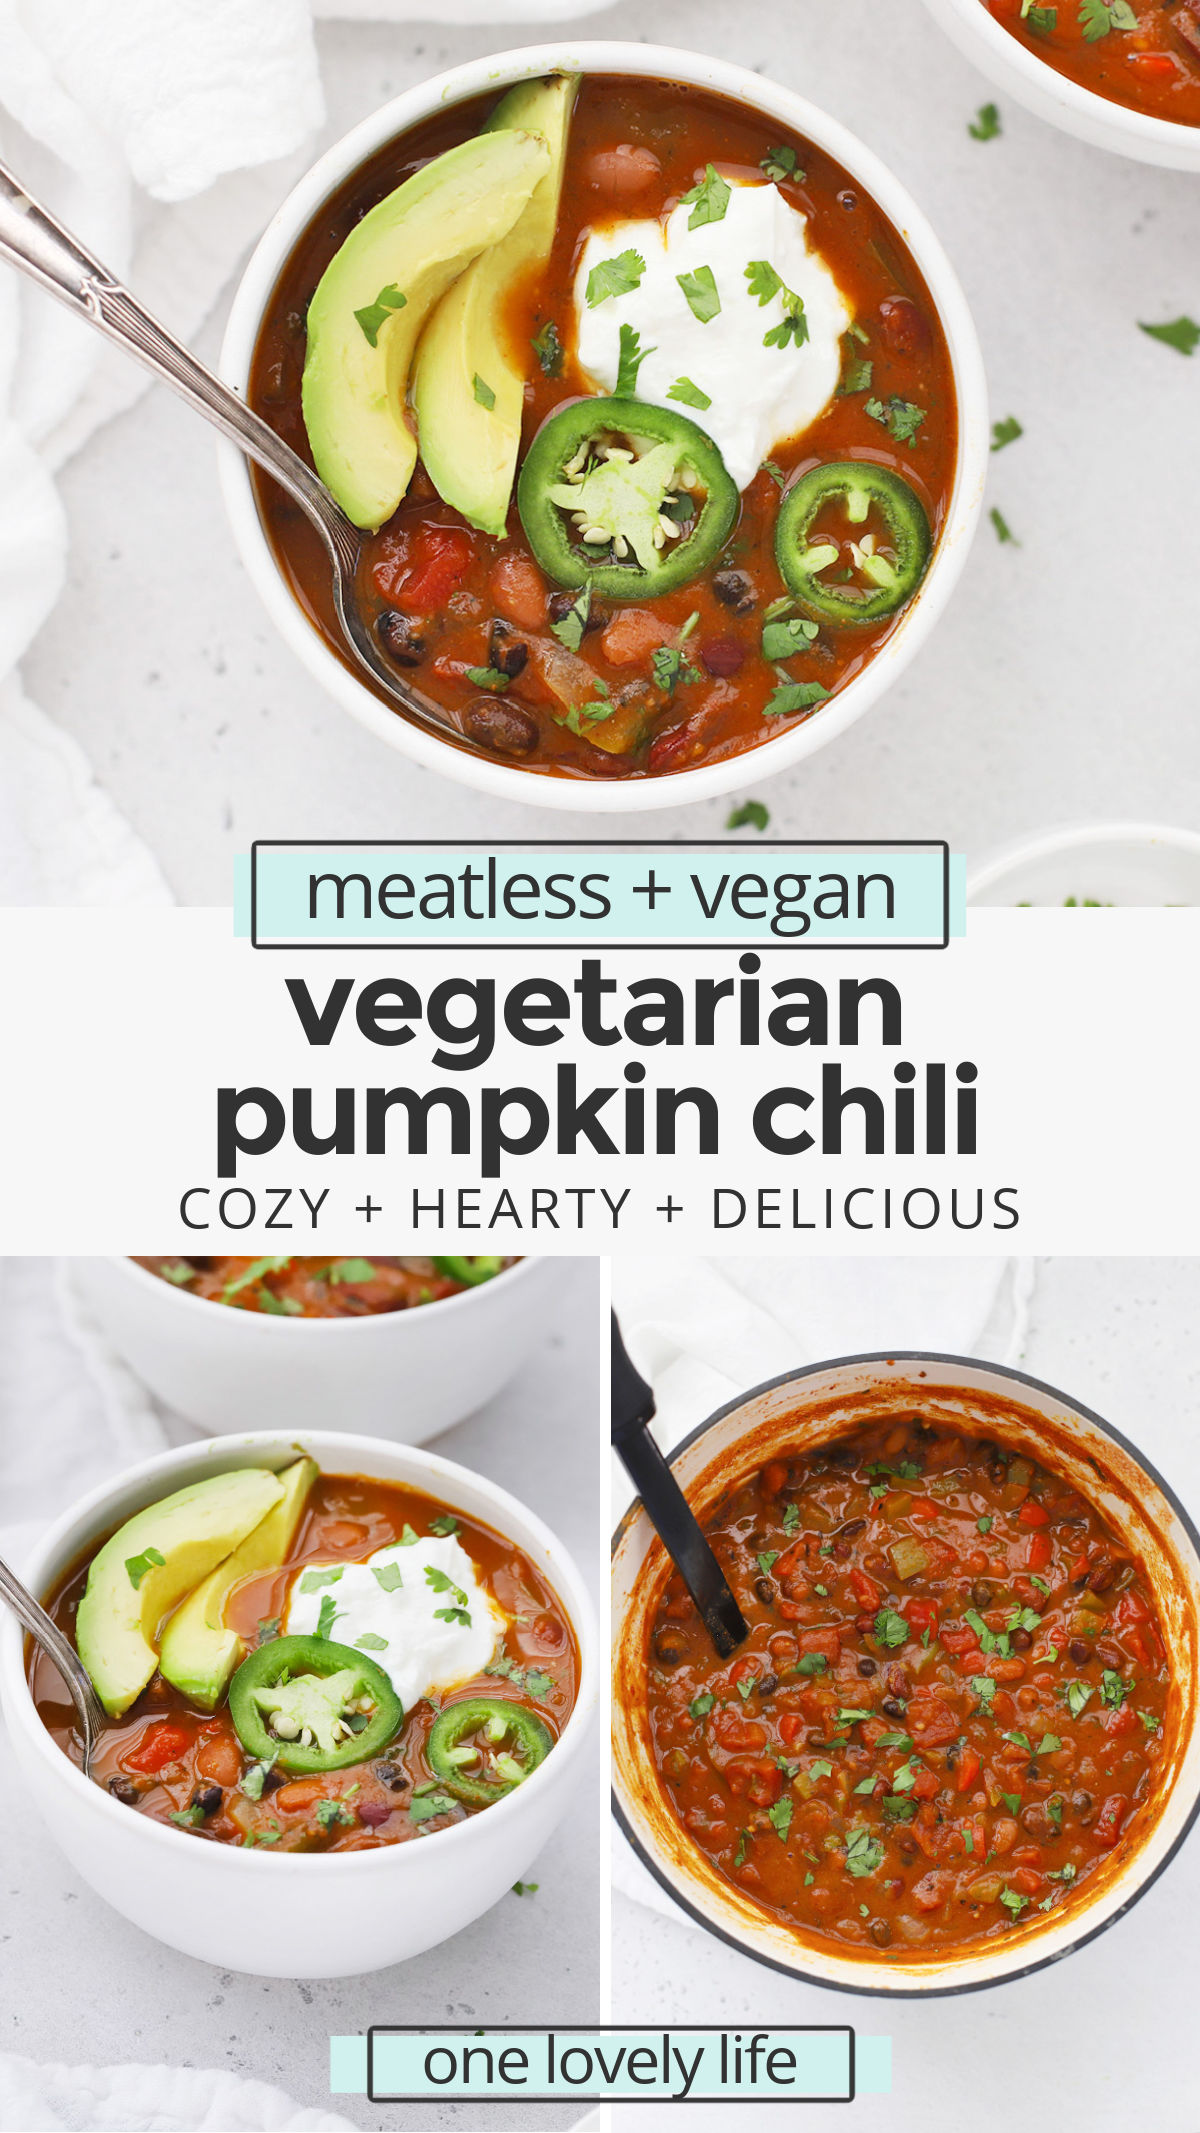 Vegetarian Pumpkin Chili - This cozy vegetarian chili recipe is perfect for cold weather and rainy days. You'll love the flavors! (Gluten-Free, Vegan) // Vegan pumpkin chili recipe // vegan chili recipe // vegetarian dinner // vegetarian lunch // healthy lunch // healthy dinner // chili cookoff recipe